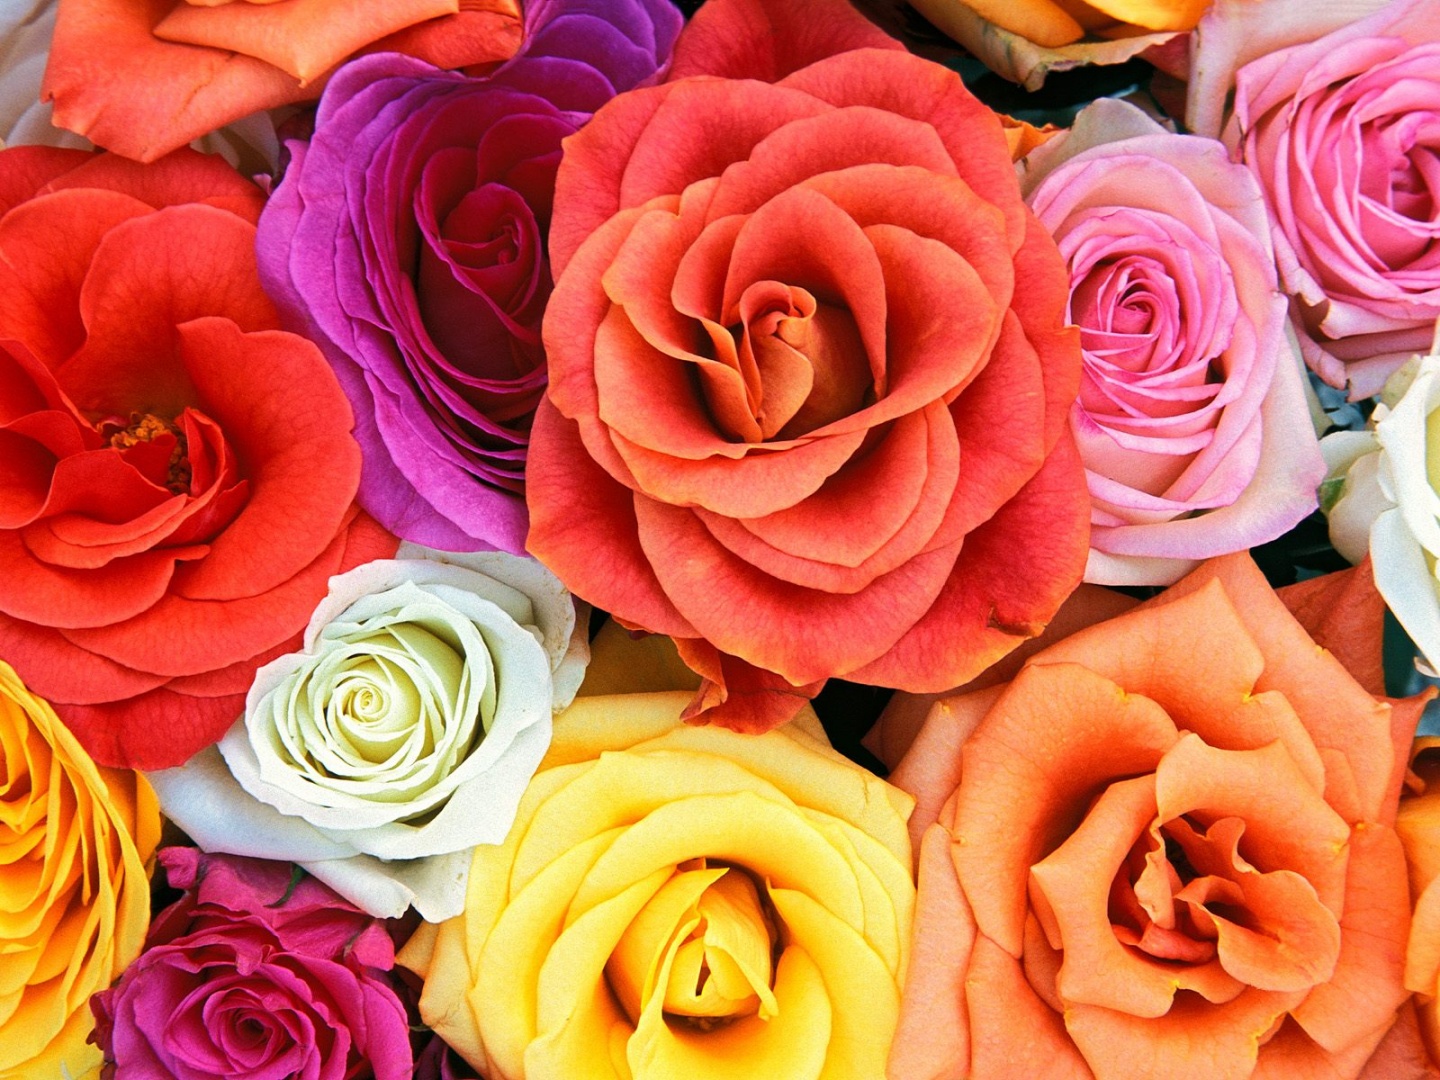 Colorfull Roses